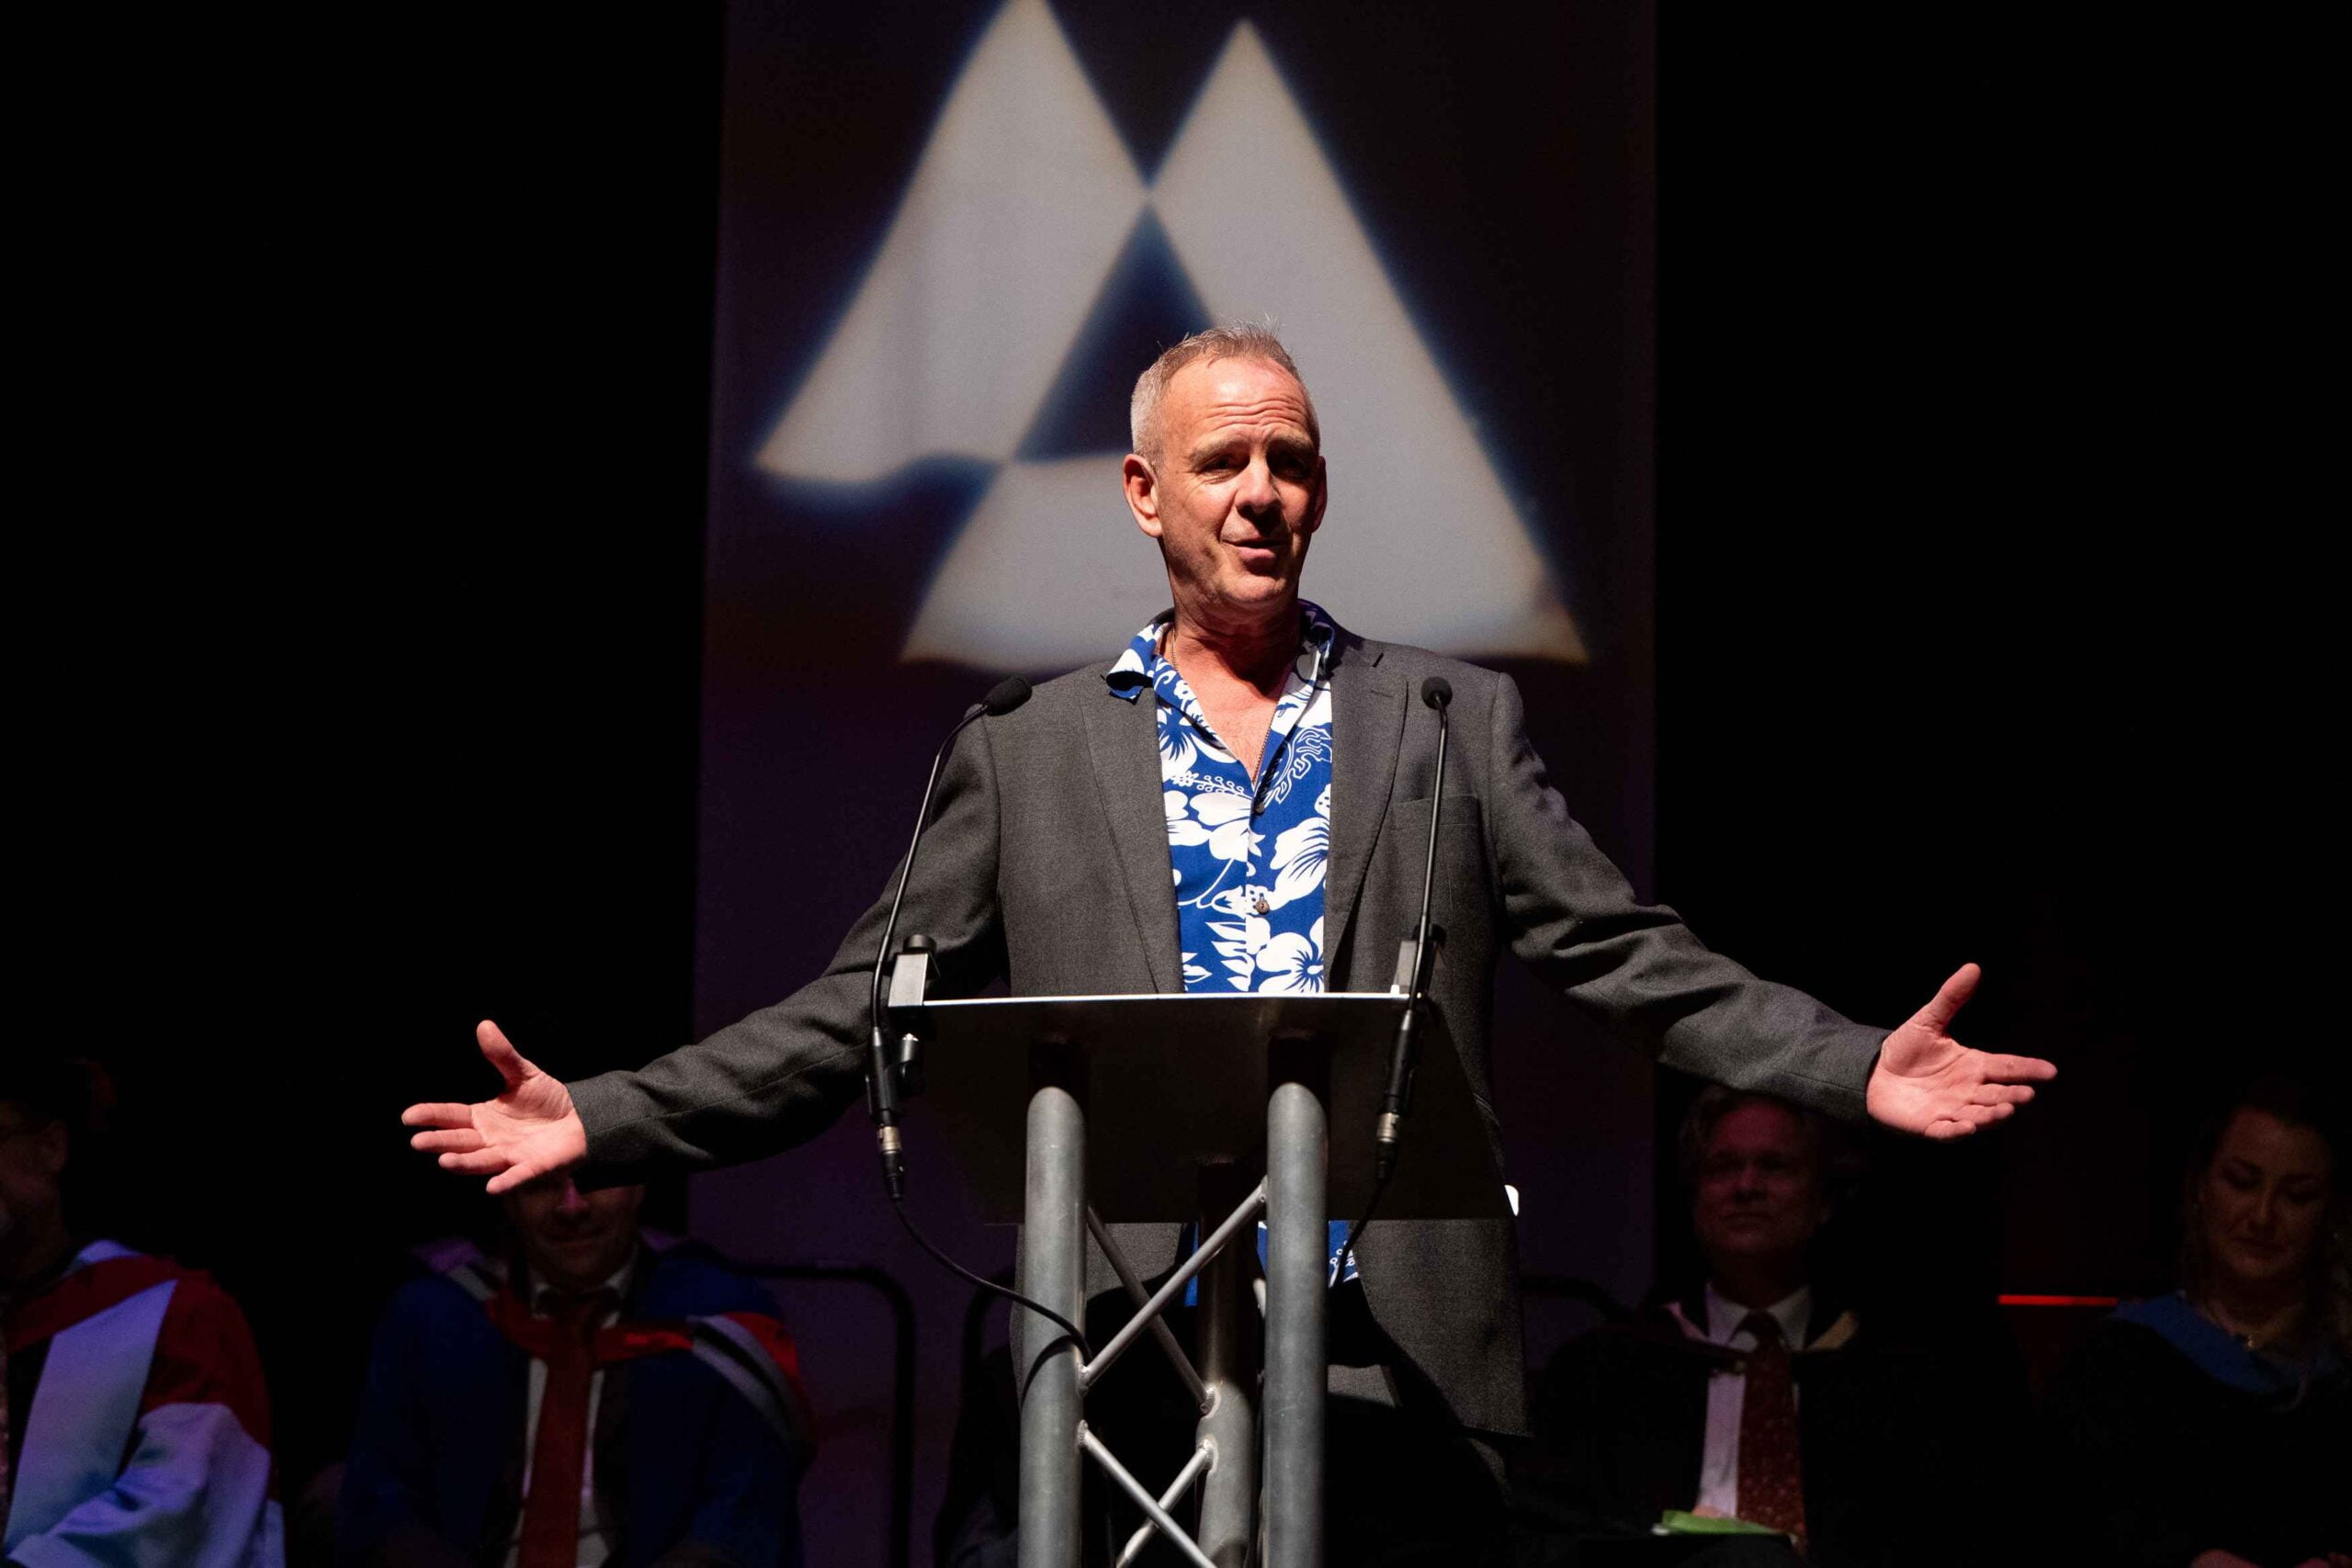 Fatboy Slim announces BIMM scholarship offered in partnership with Martlets Hospice